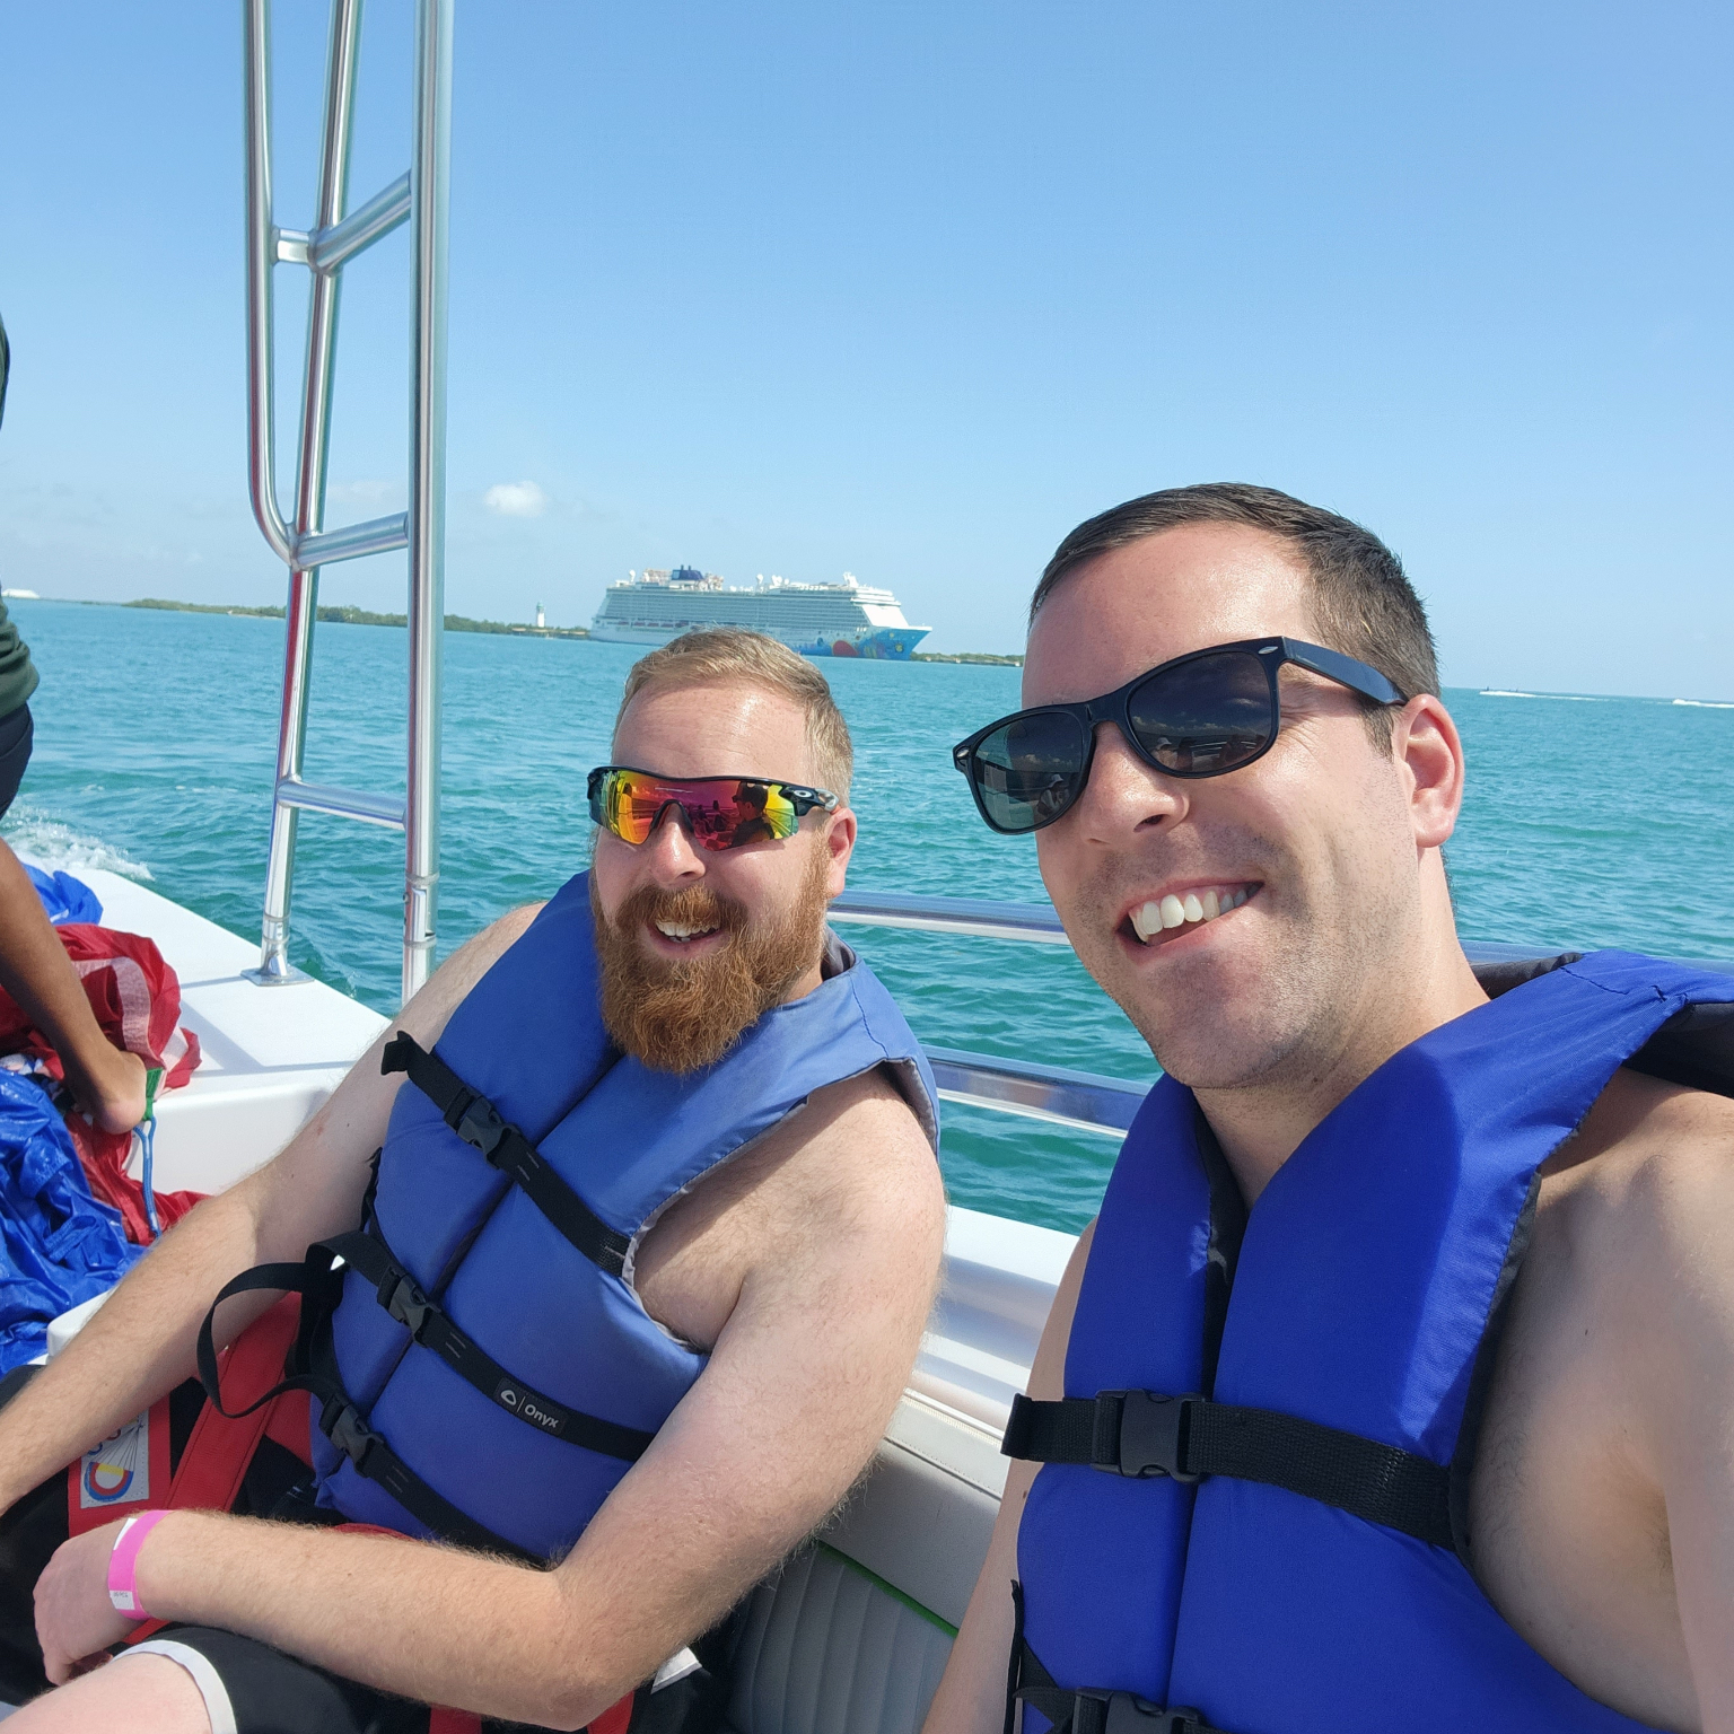 Kevin, alongside his brother Craig, set to soar over Belize's stunning waters during our family cruise. Parasailing adventure awaits! 🌊🪂🚢